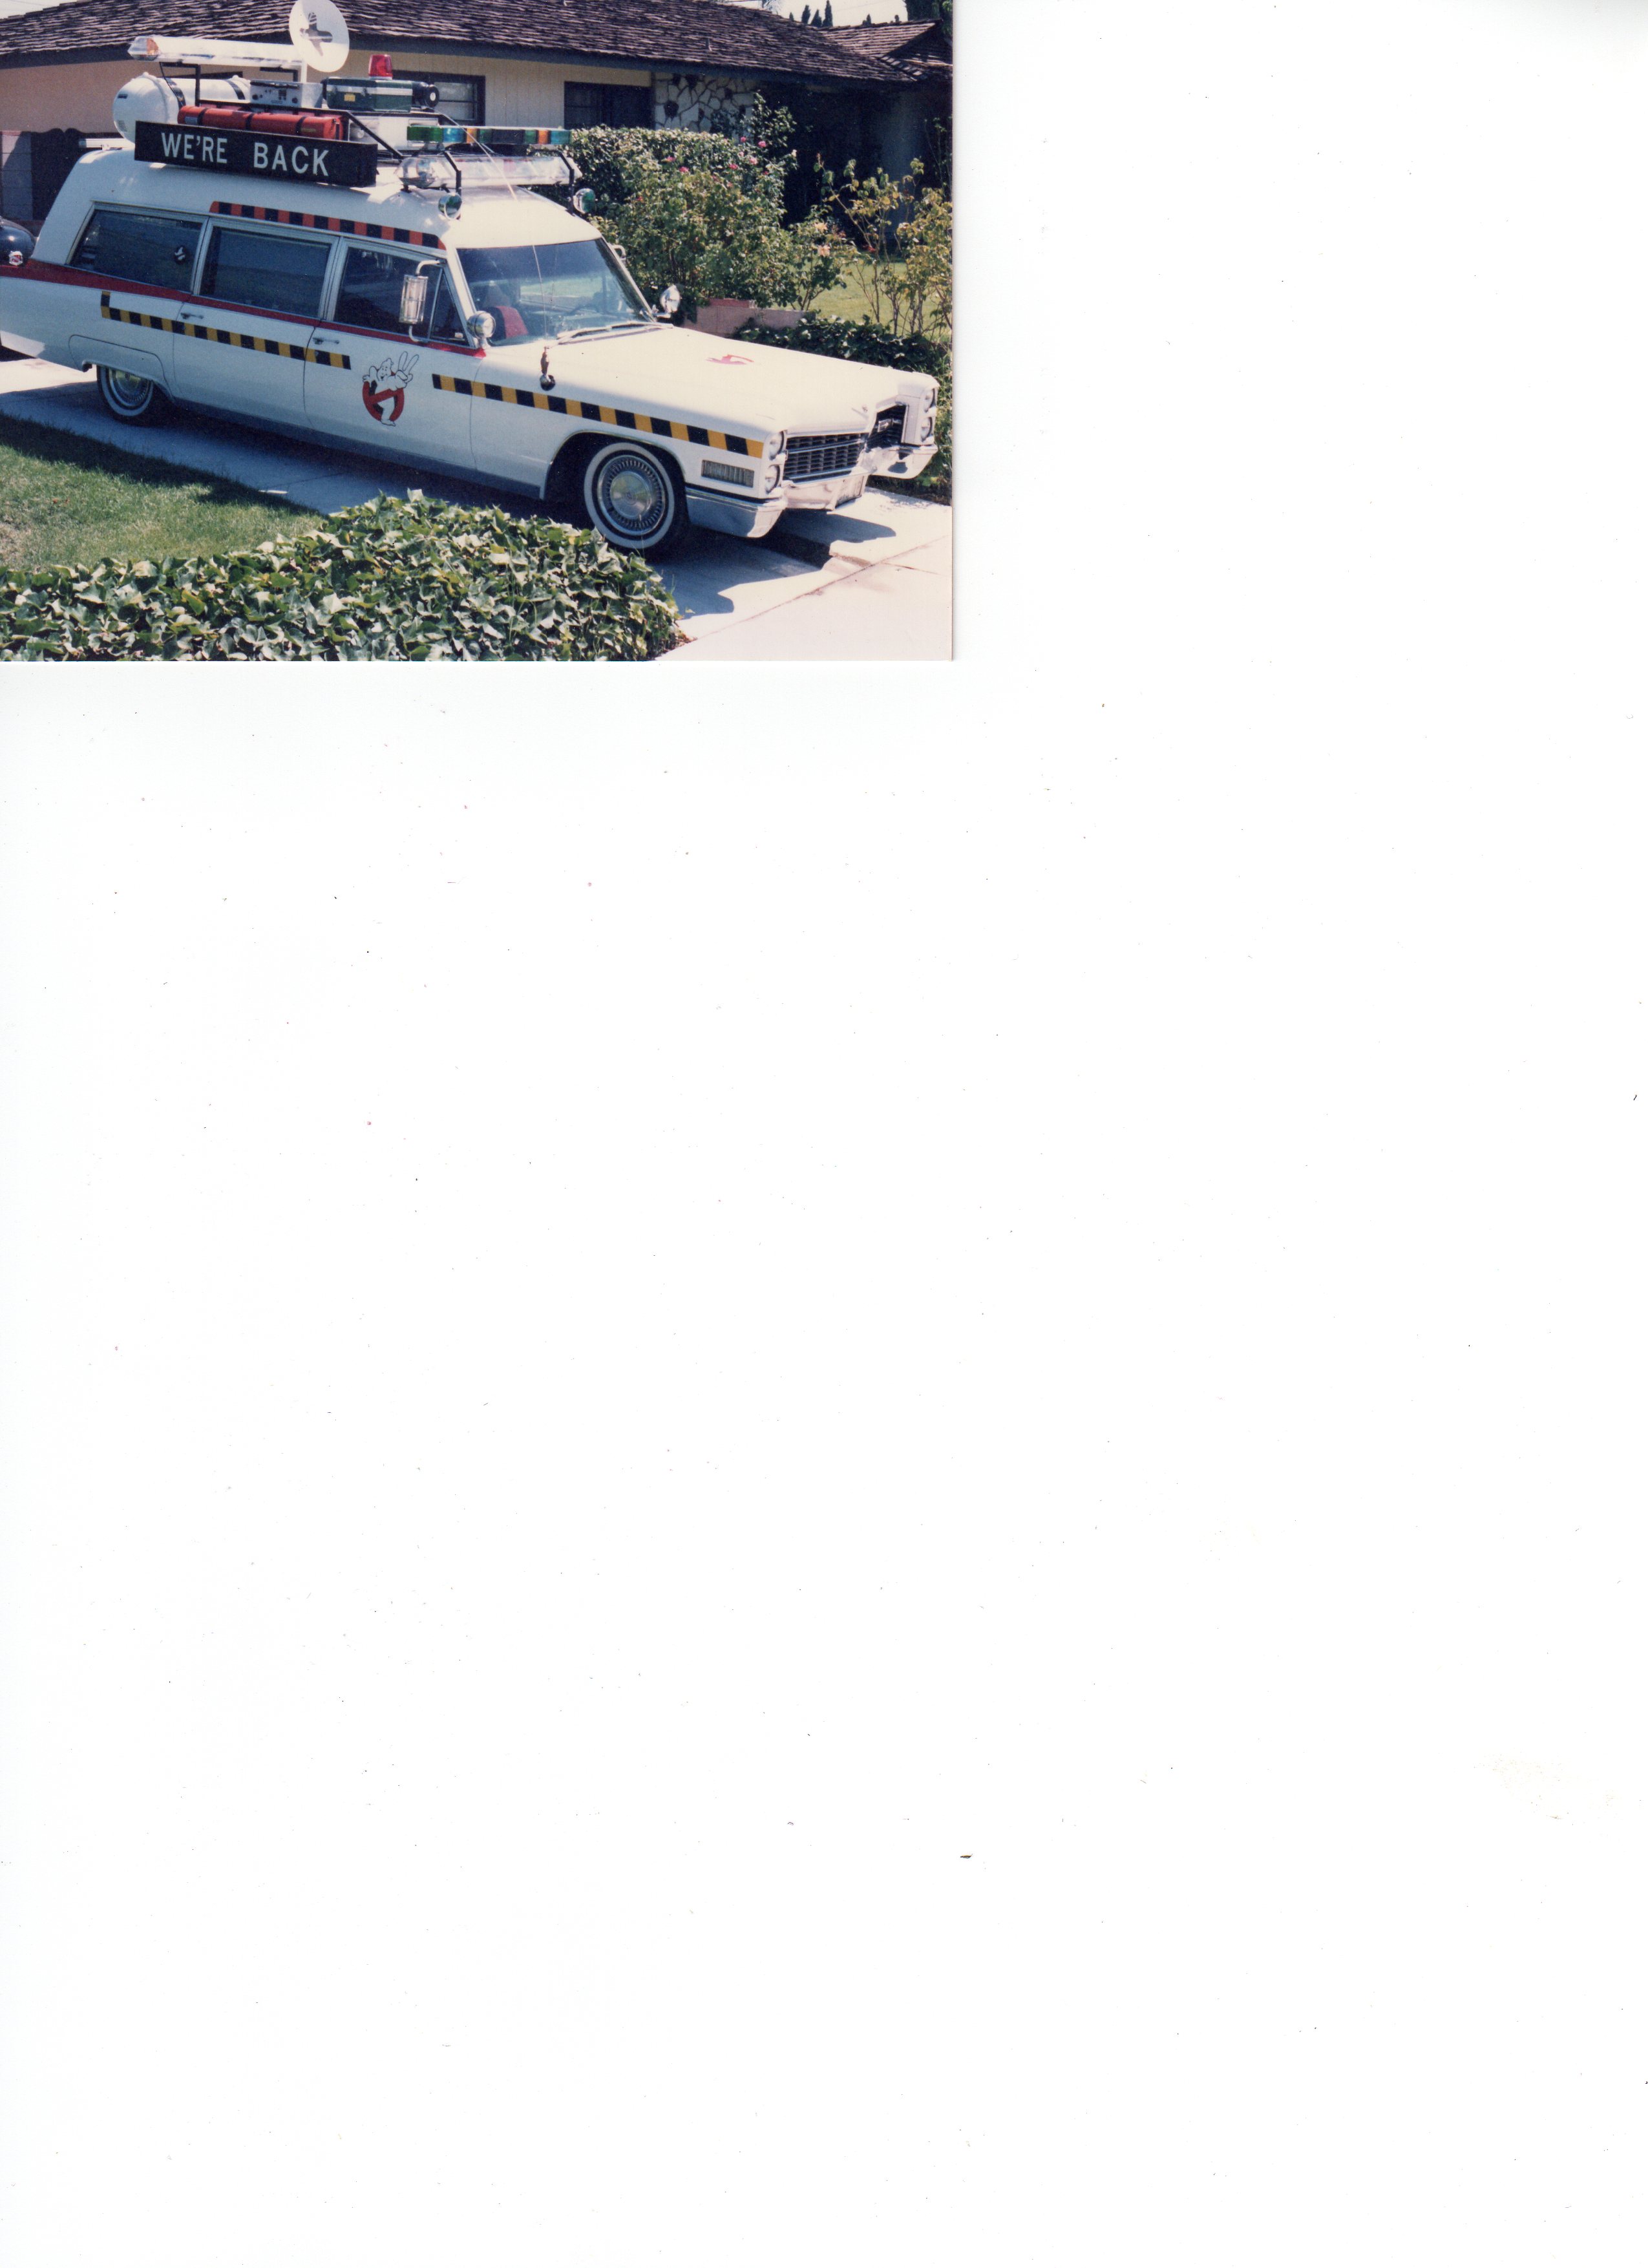 ECTO 1A built on 1966 Cadillac fabricated by P. Mosen